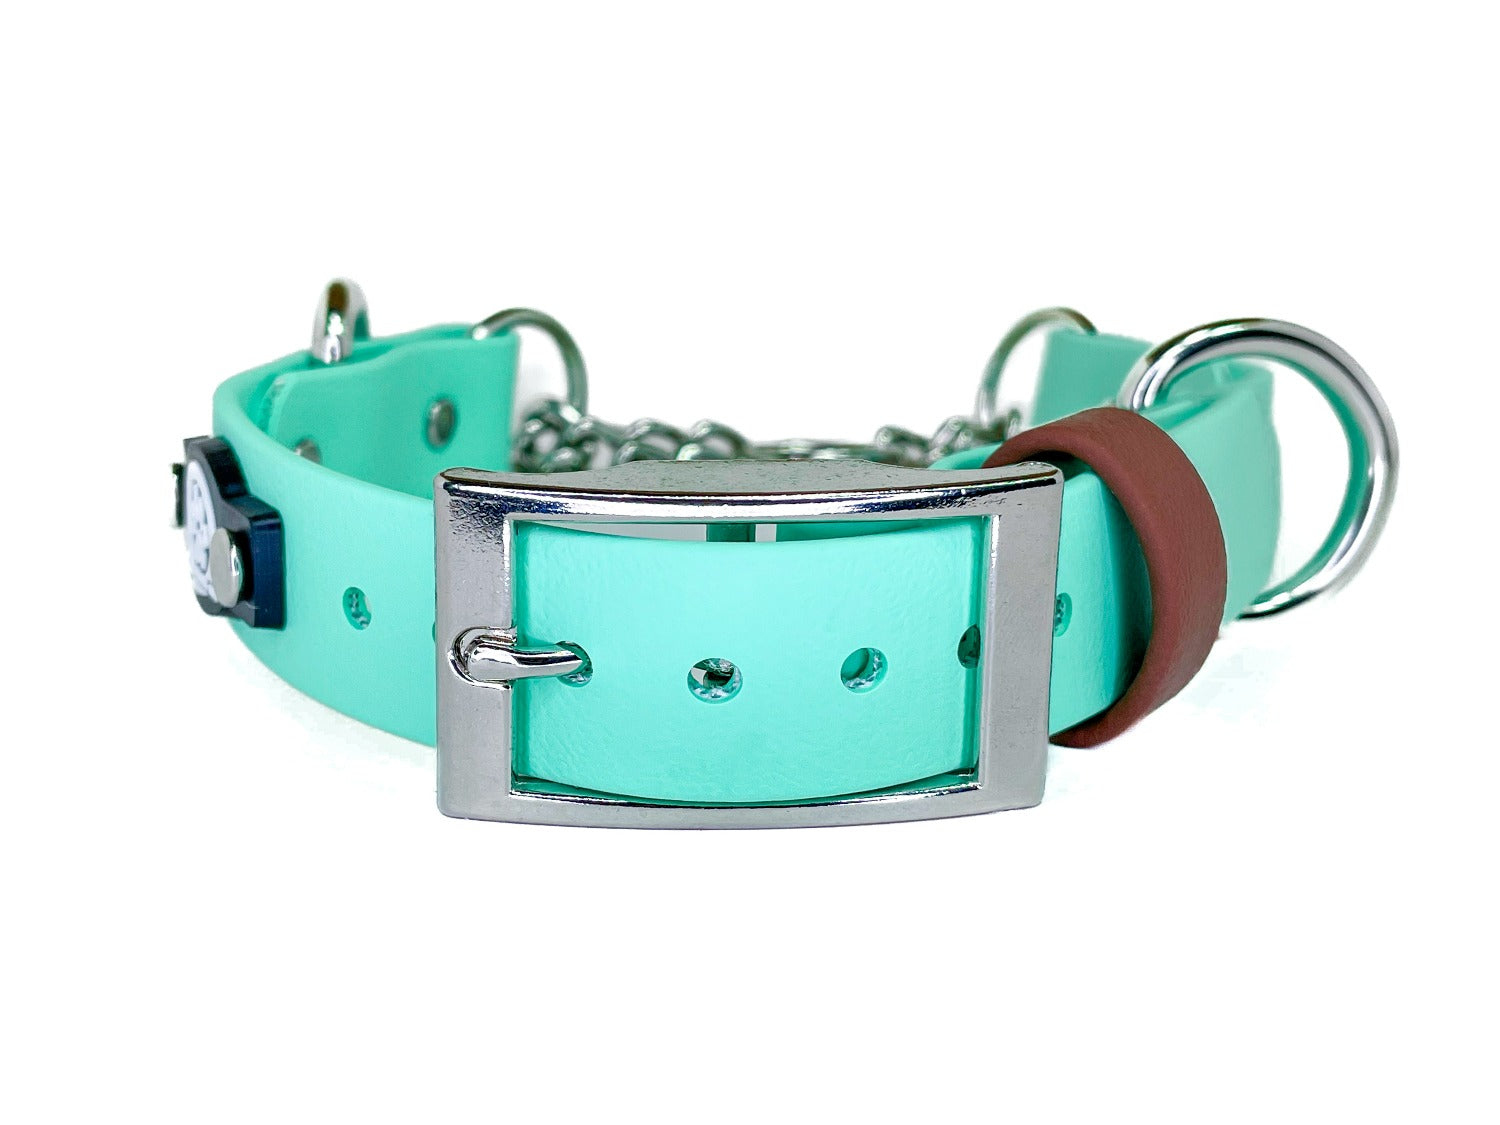 Backwoods Dog BioThane waterproof buckle martingale dog collar in mint with brown accent